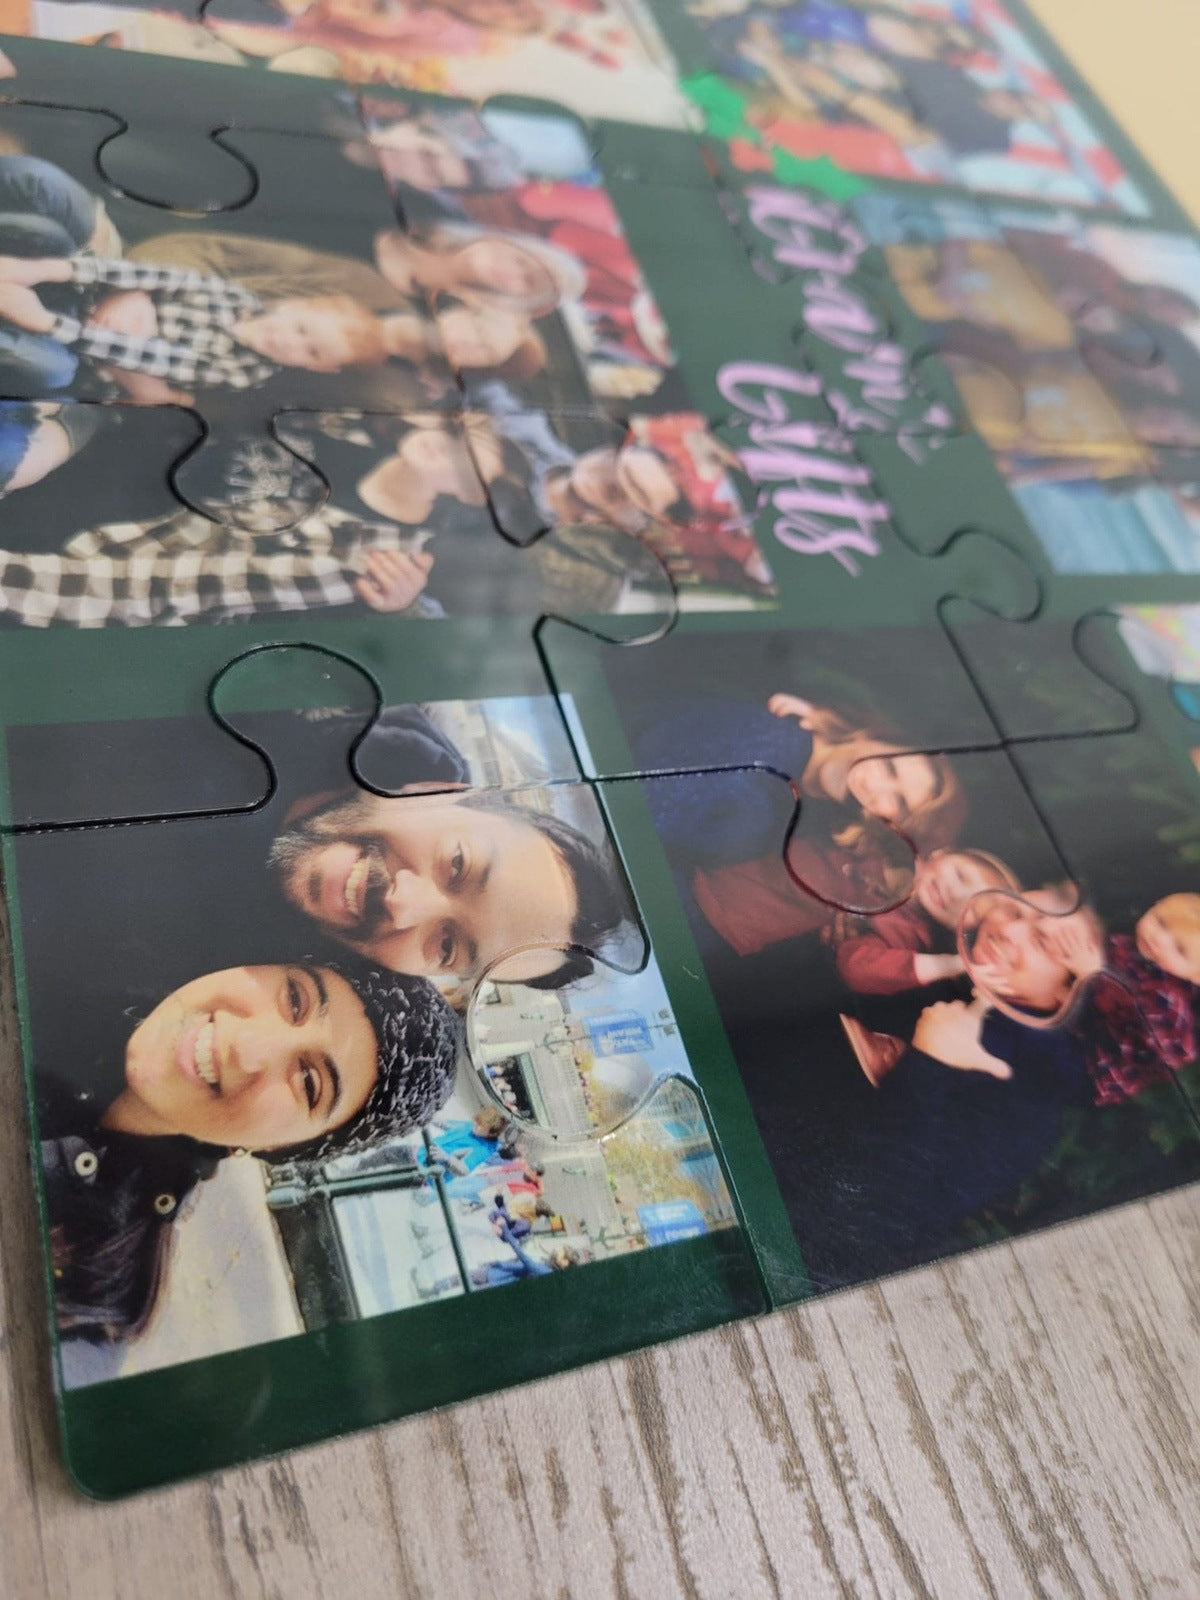 Custom Made Plexiglass Puzzle Family Photo, or any theme ideal for Valentines Day